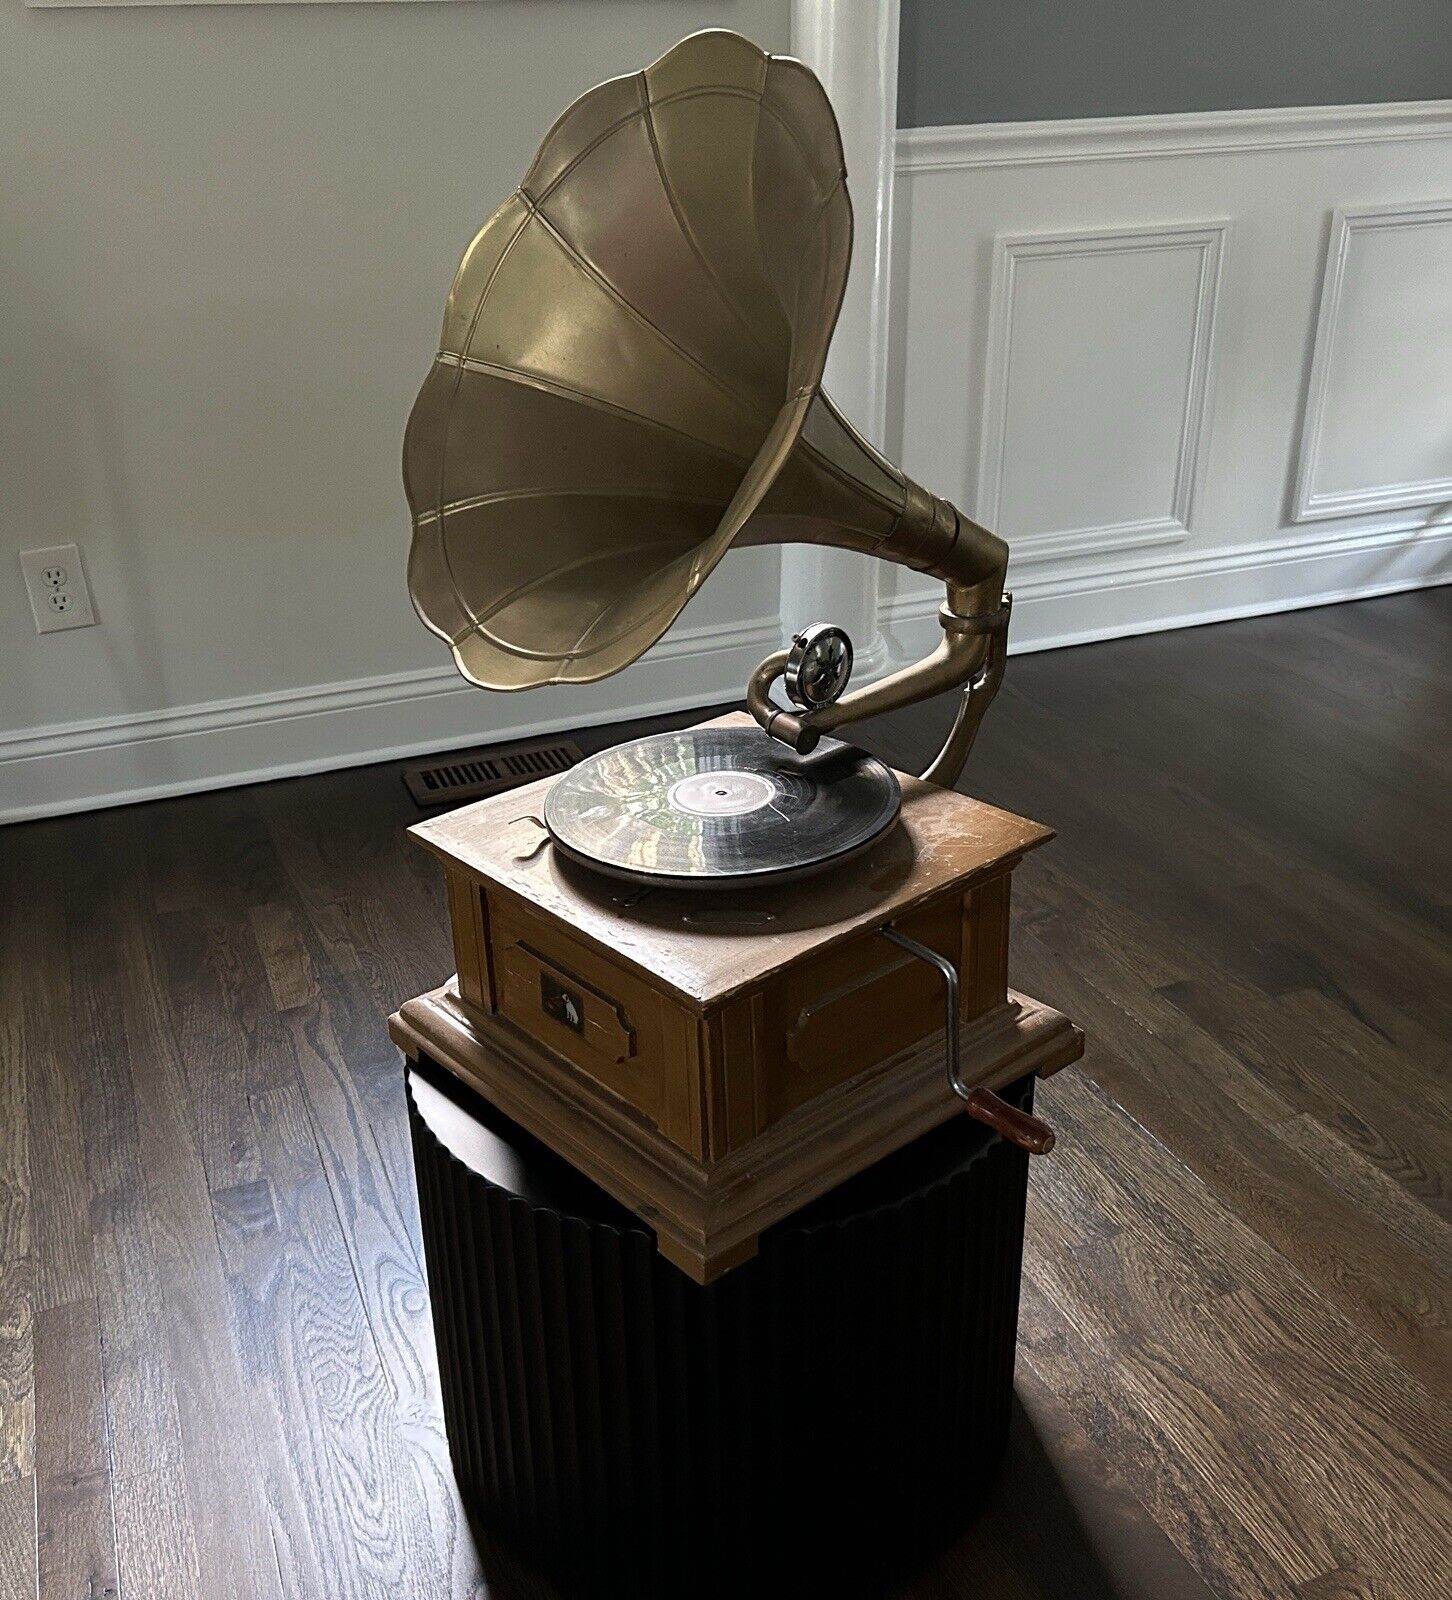 Antique Gramophone, Working Phonograph, wind-up record player